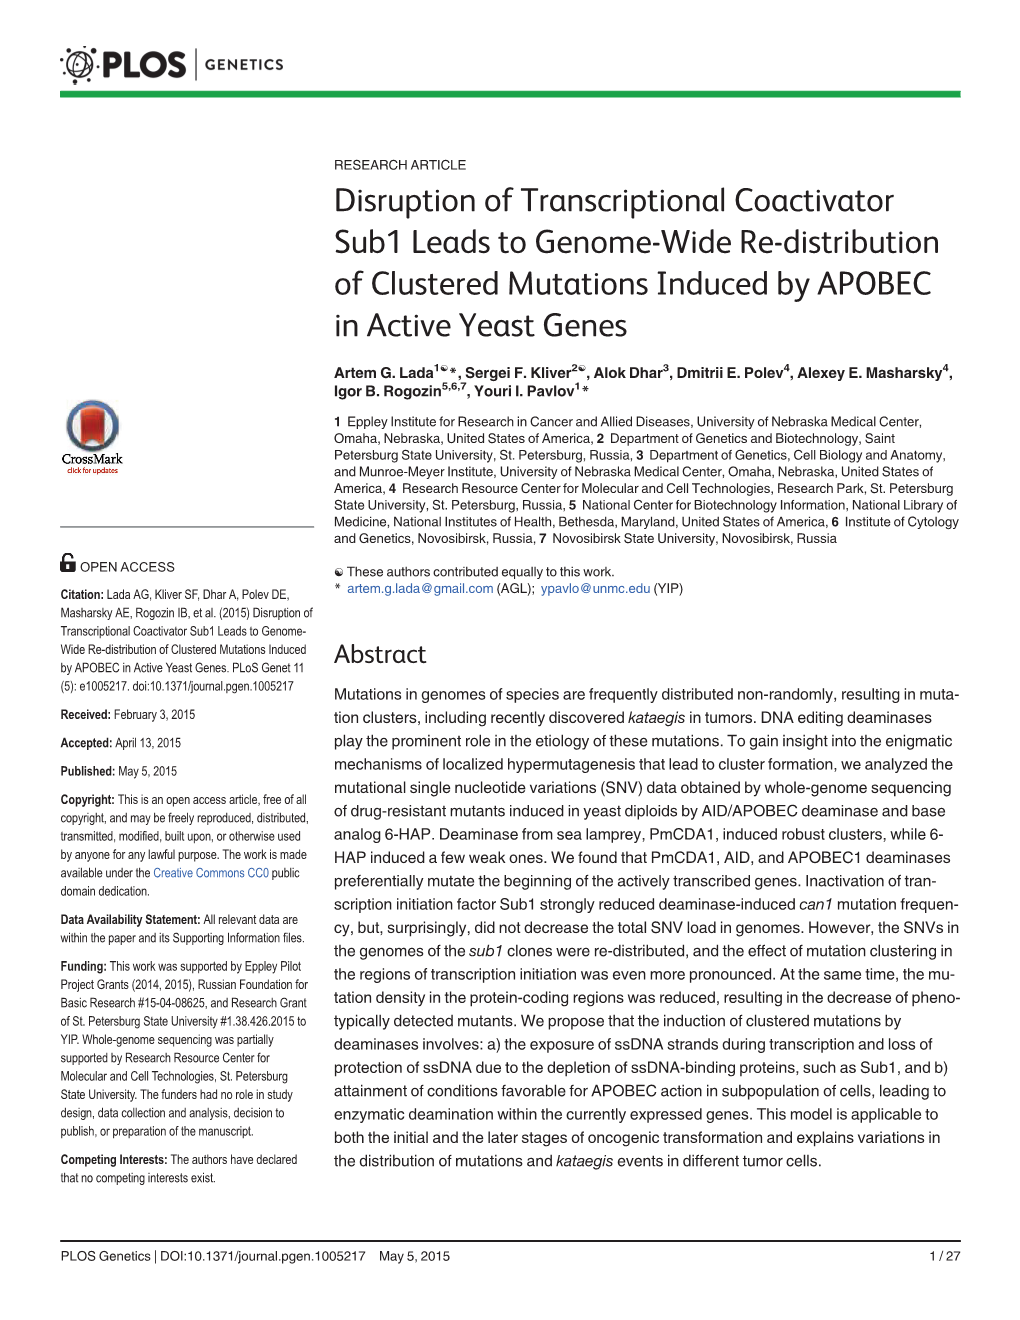 Disruption of Transcriptional Coactivator Sub1 Leads to Genome-Wide Re-Distribution of Clustered Mutations Induced by APOBEC in Active Yeast Genes